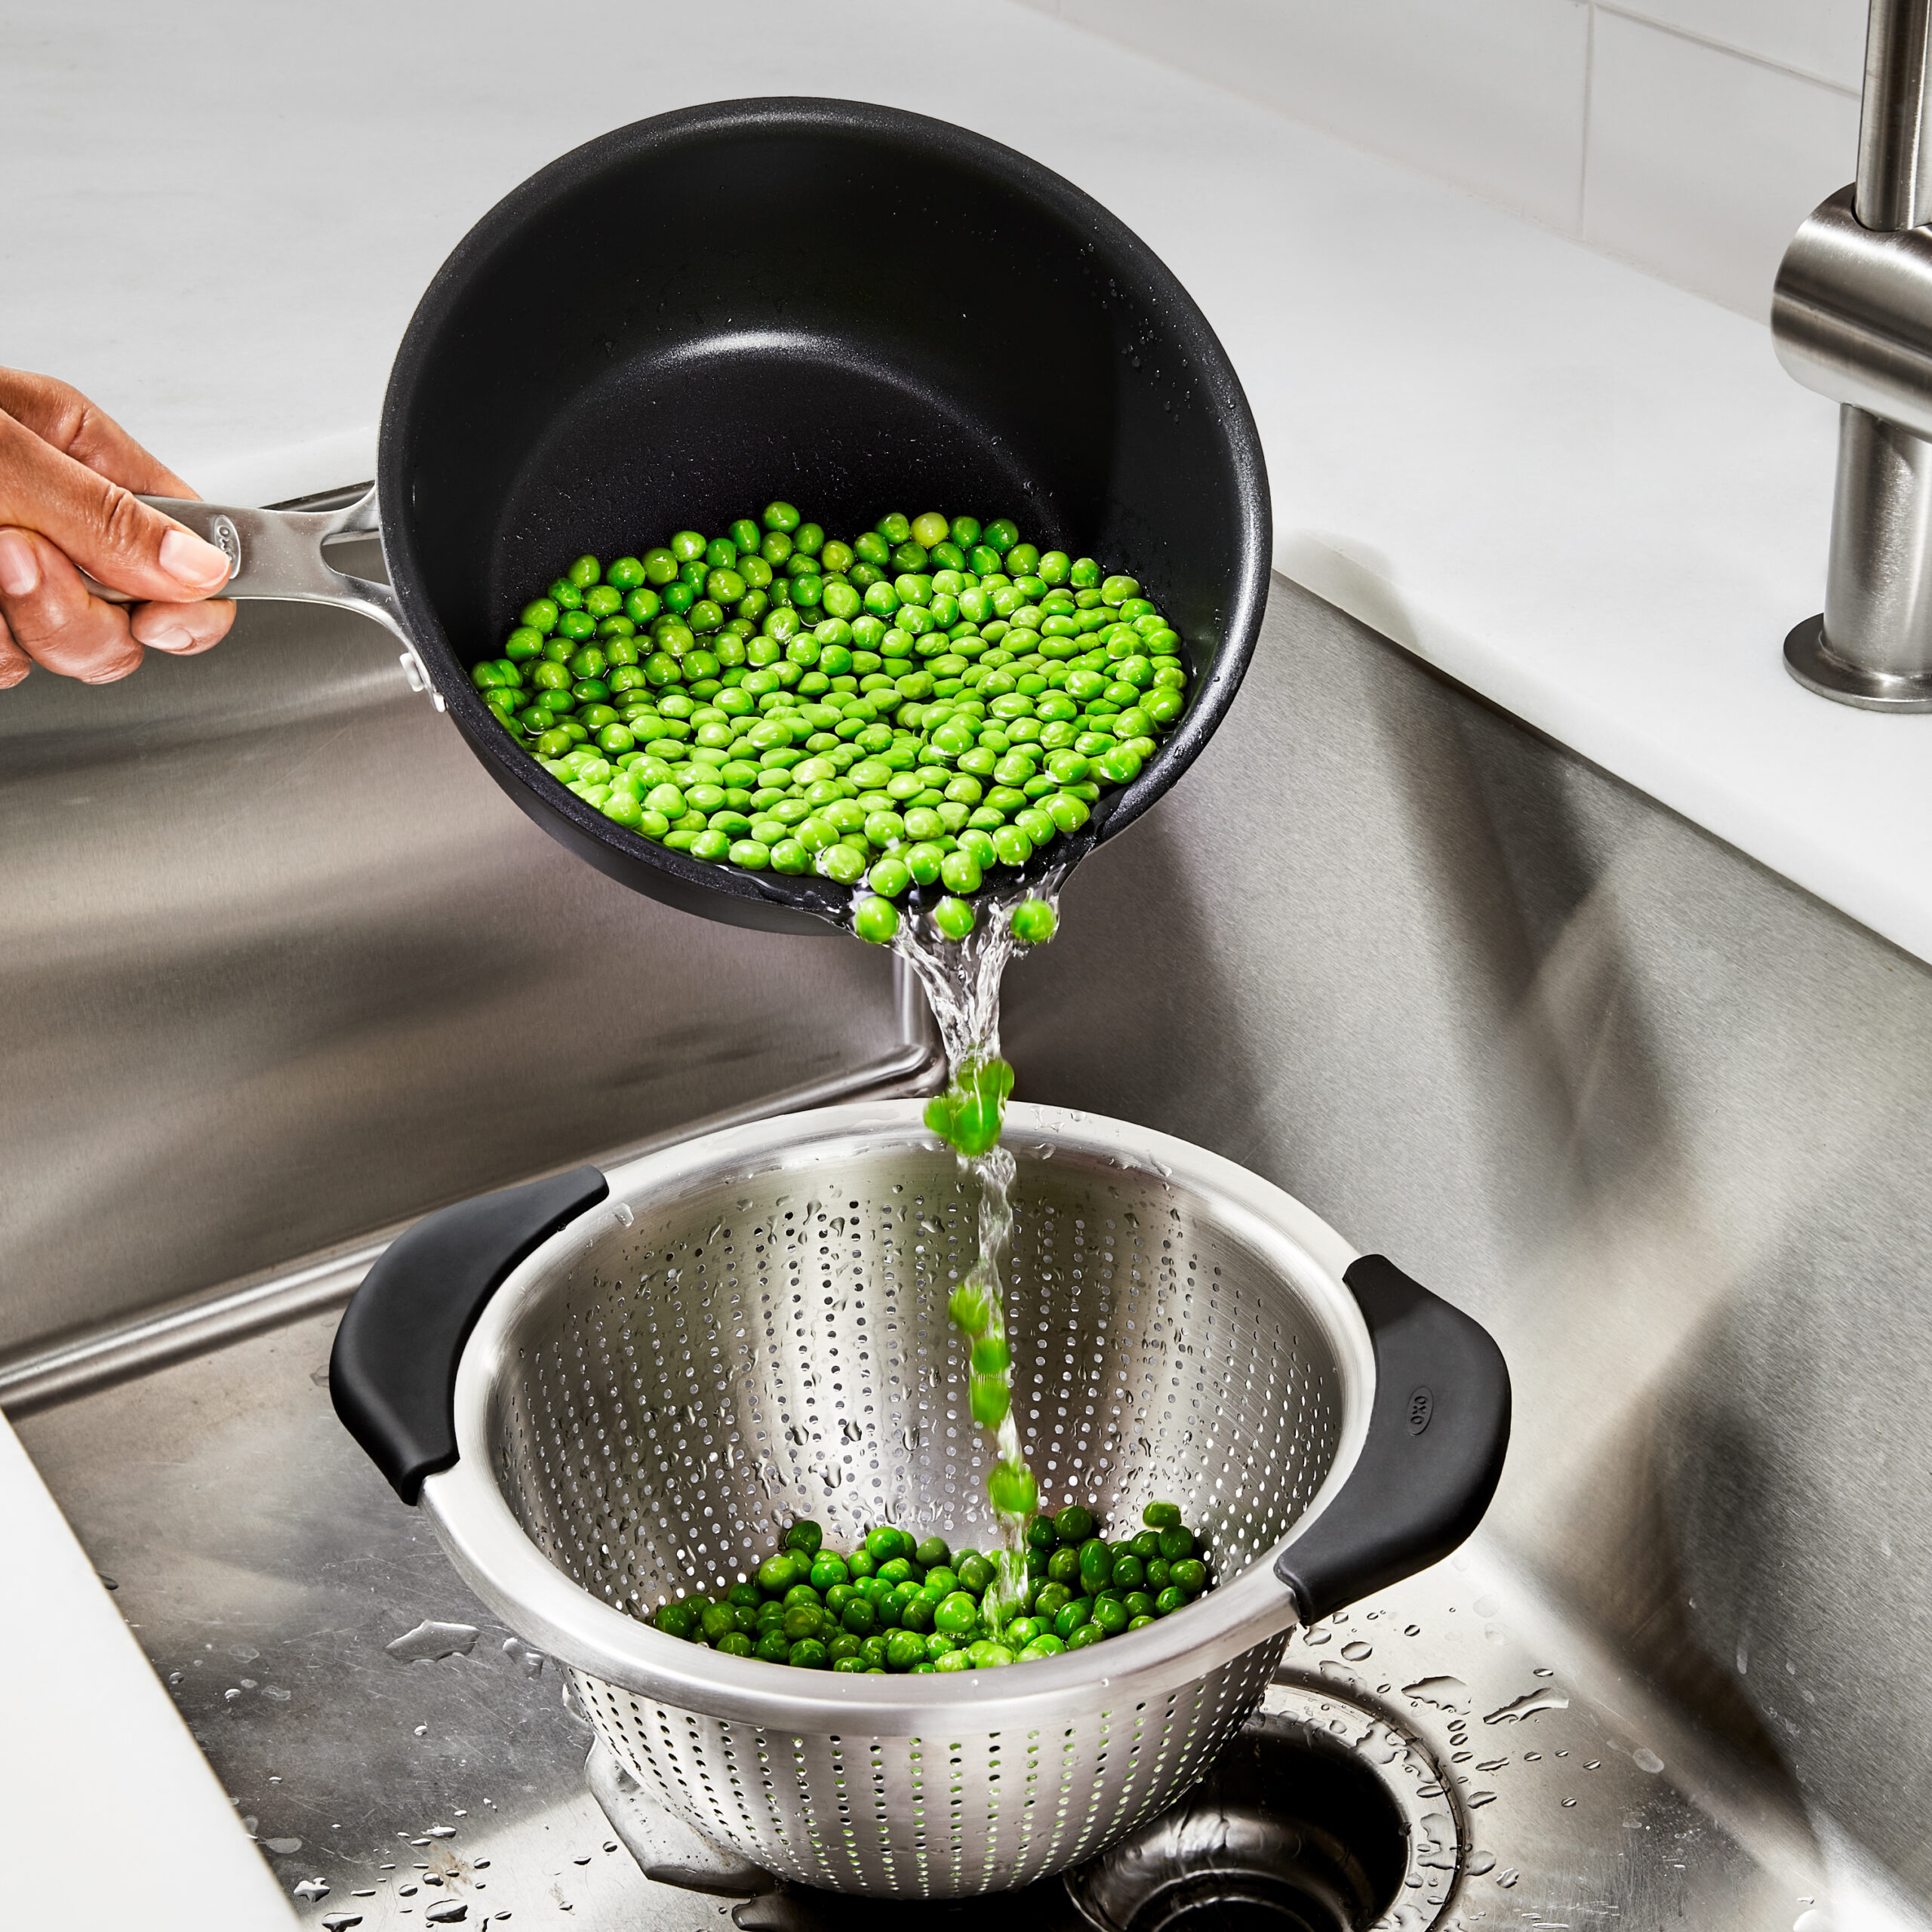 https://www.oxouk.com/wp-content/uploads/GG_11330800_StainlessSteelColander3qt_PDP_05-scaled.jpg